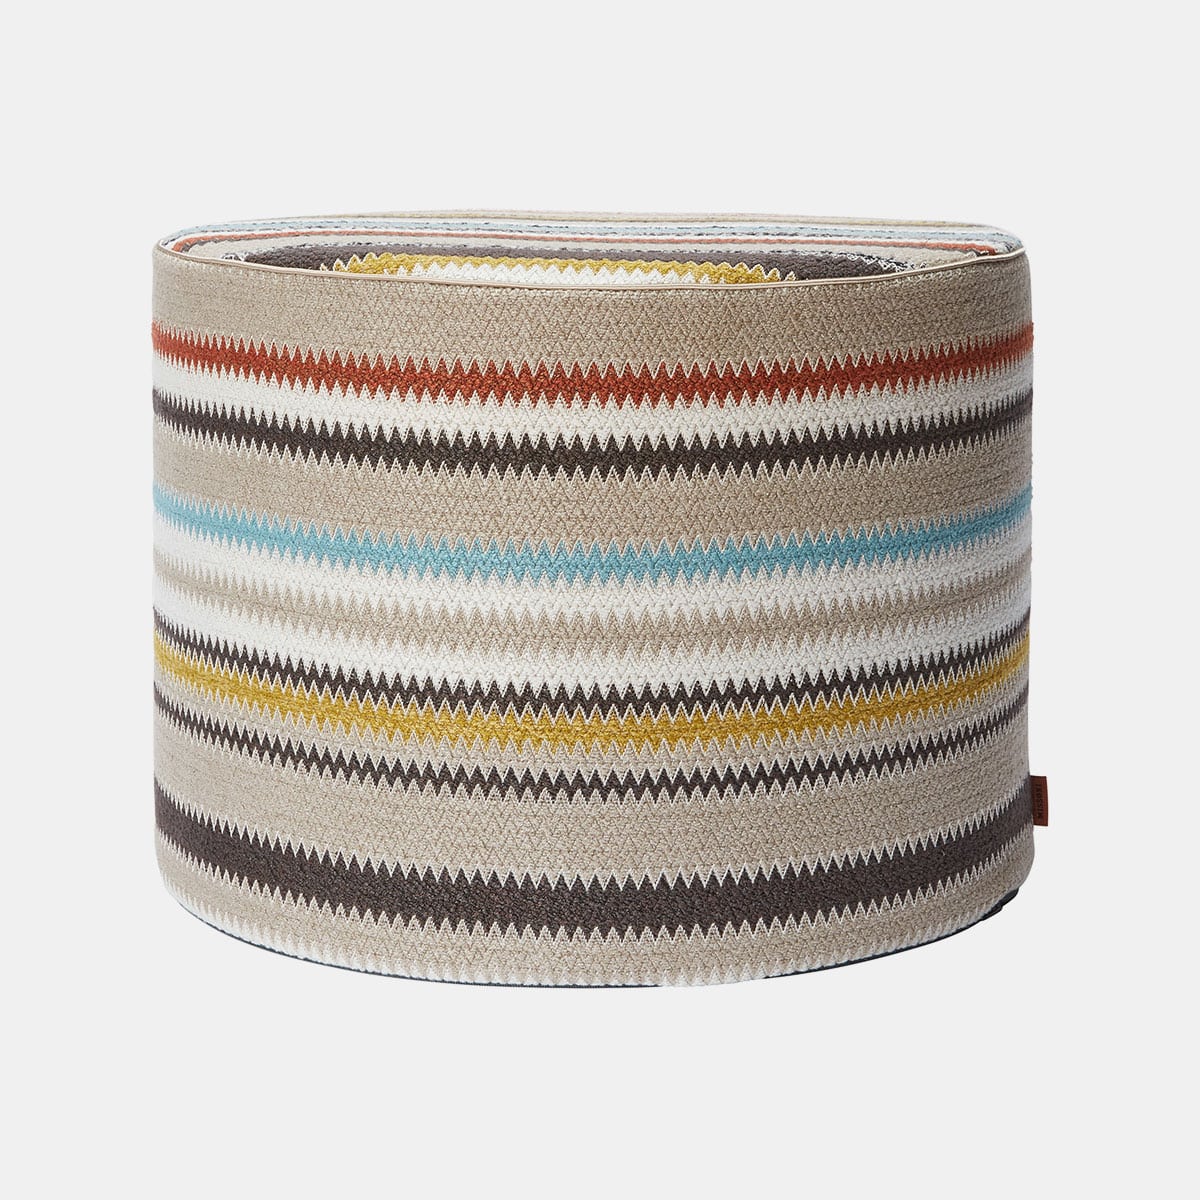 missoni-home-blurred-cylindrical-pouf-172-001shop